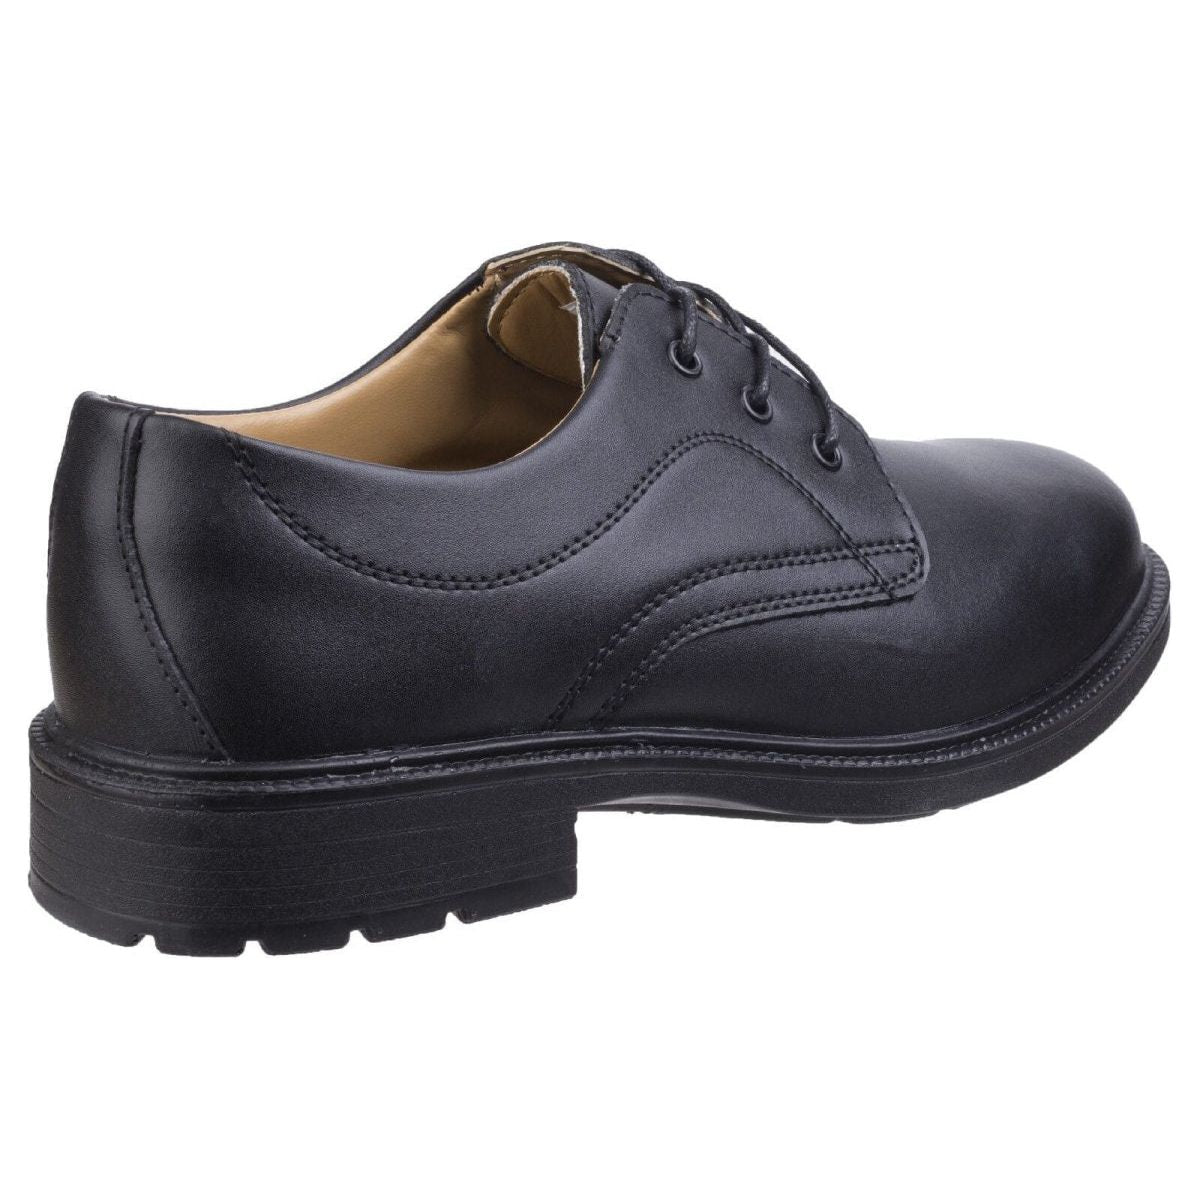 Amblers Fs45 Safety Shoes Womens - workweargurus.com